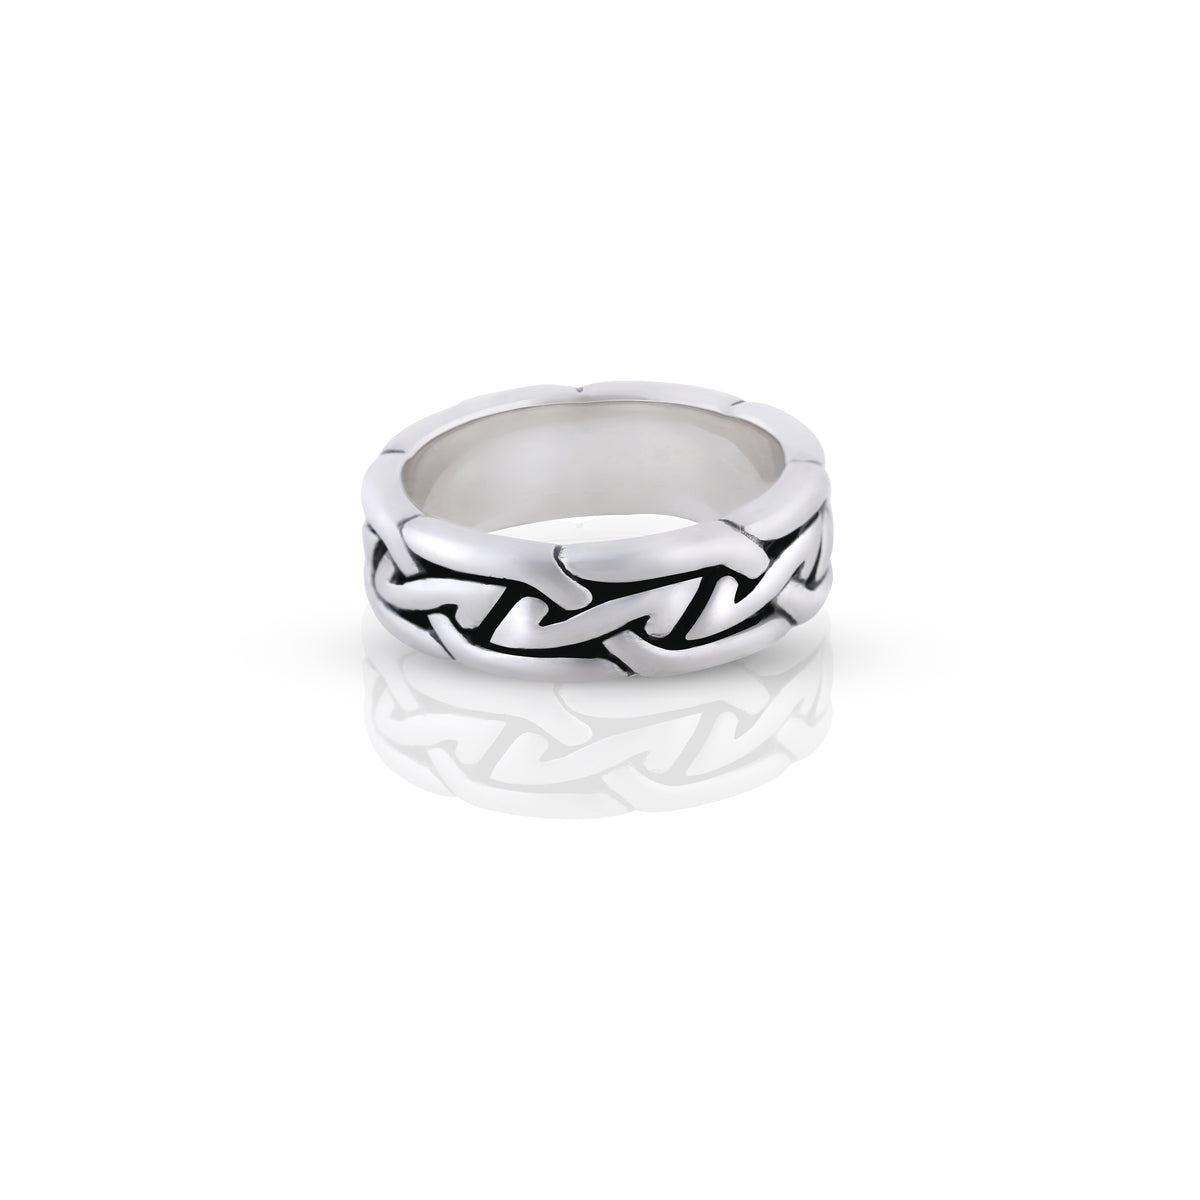 Silver Lining Ring